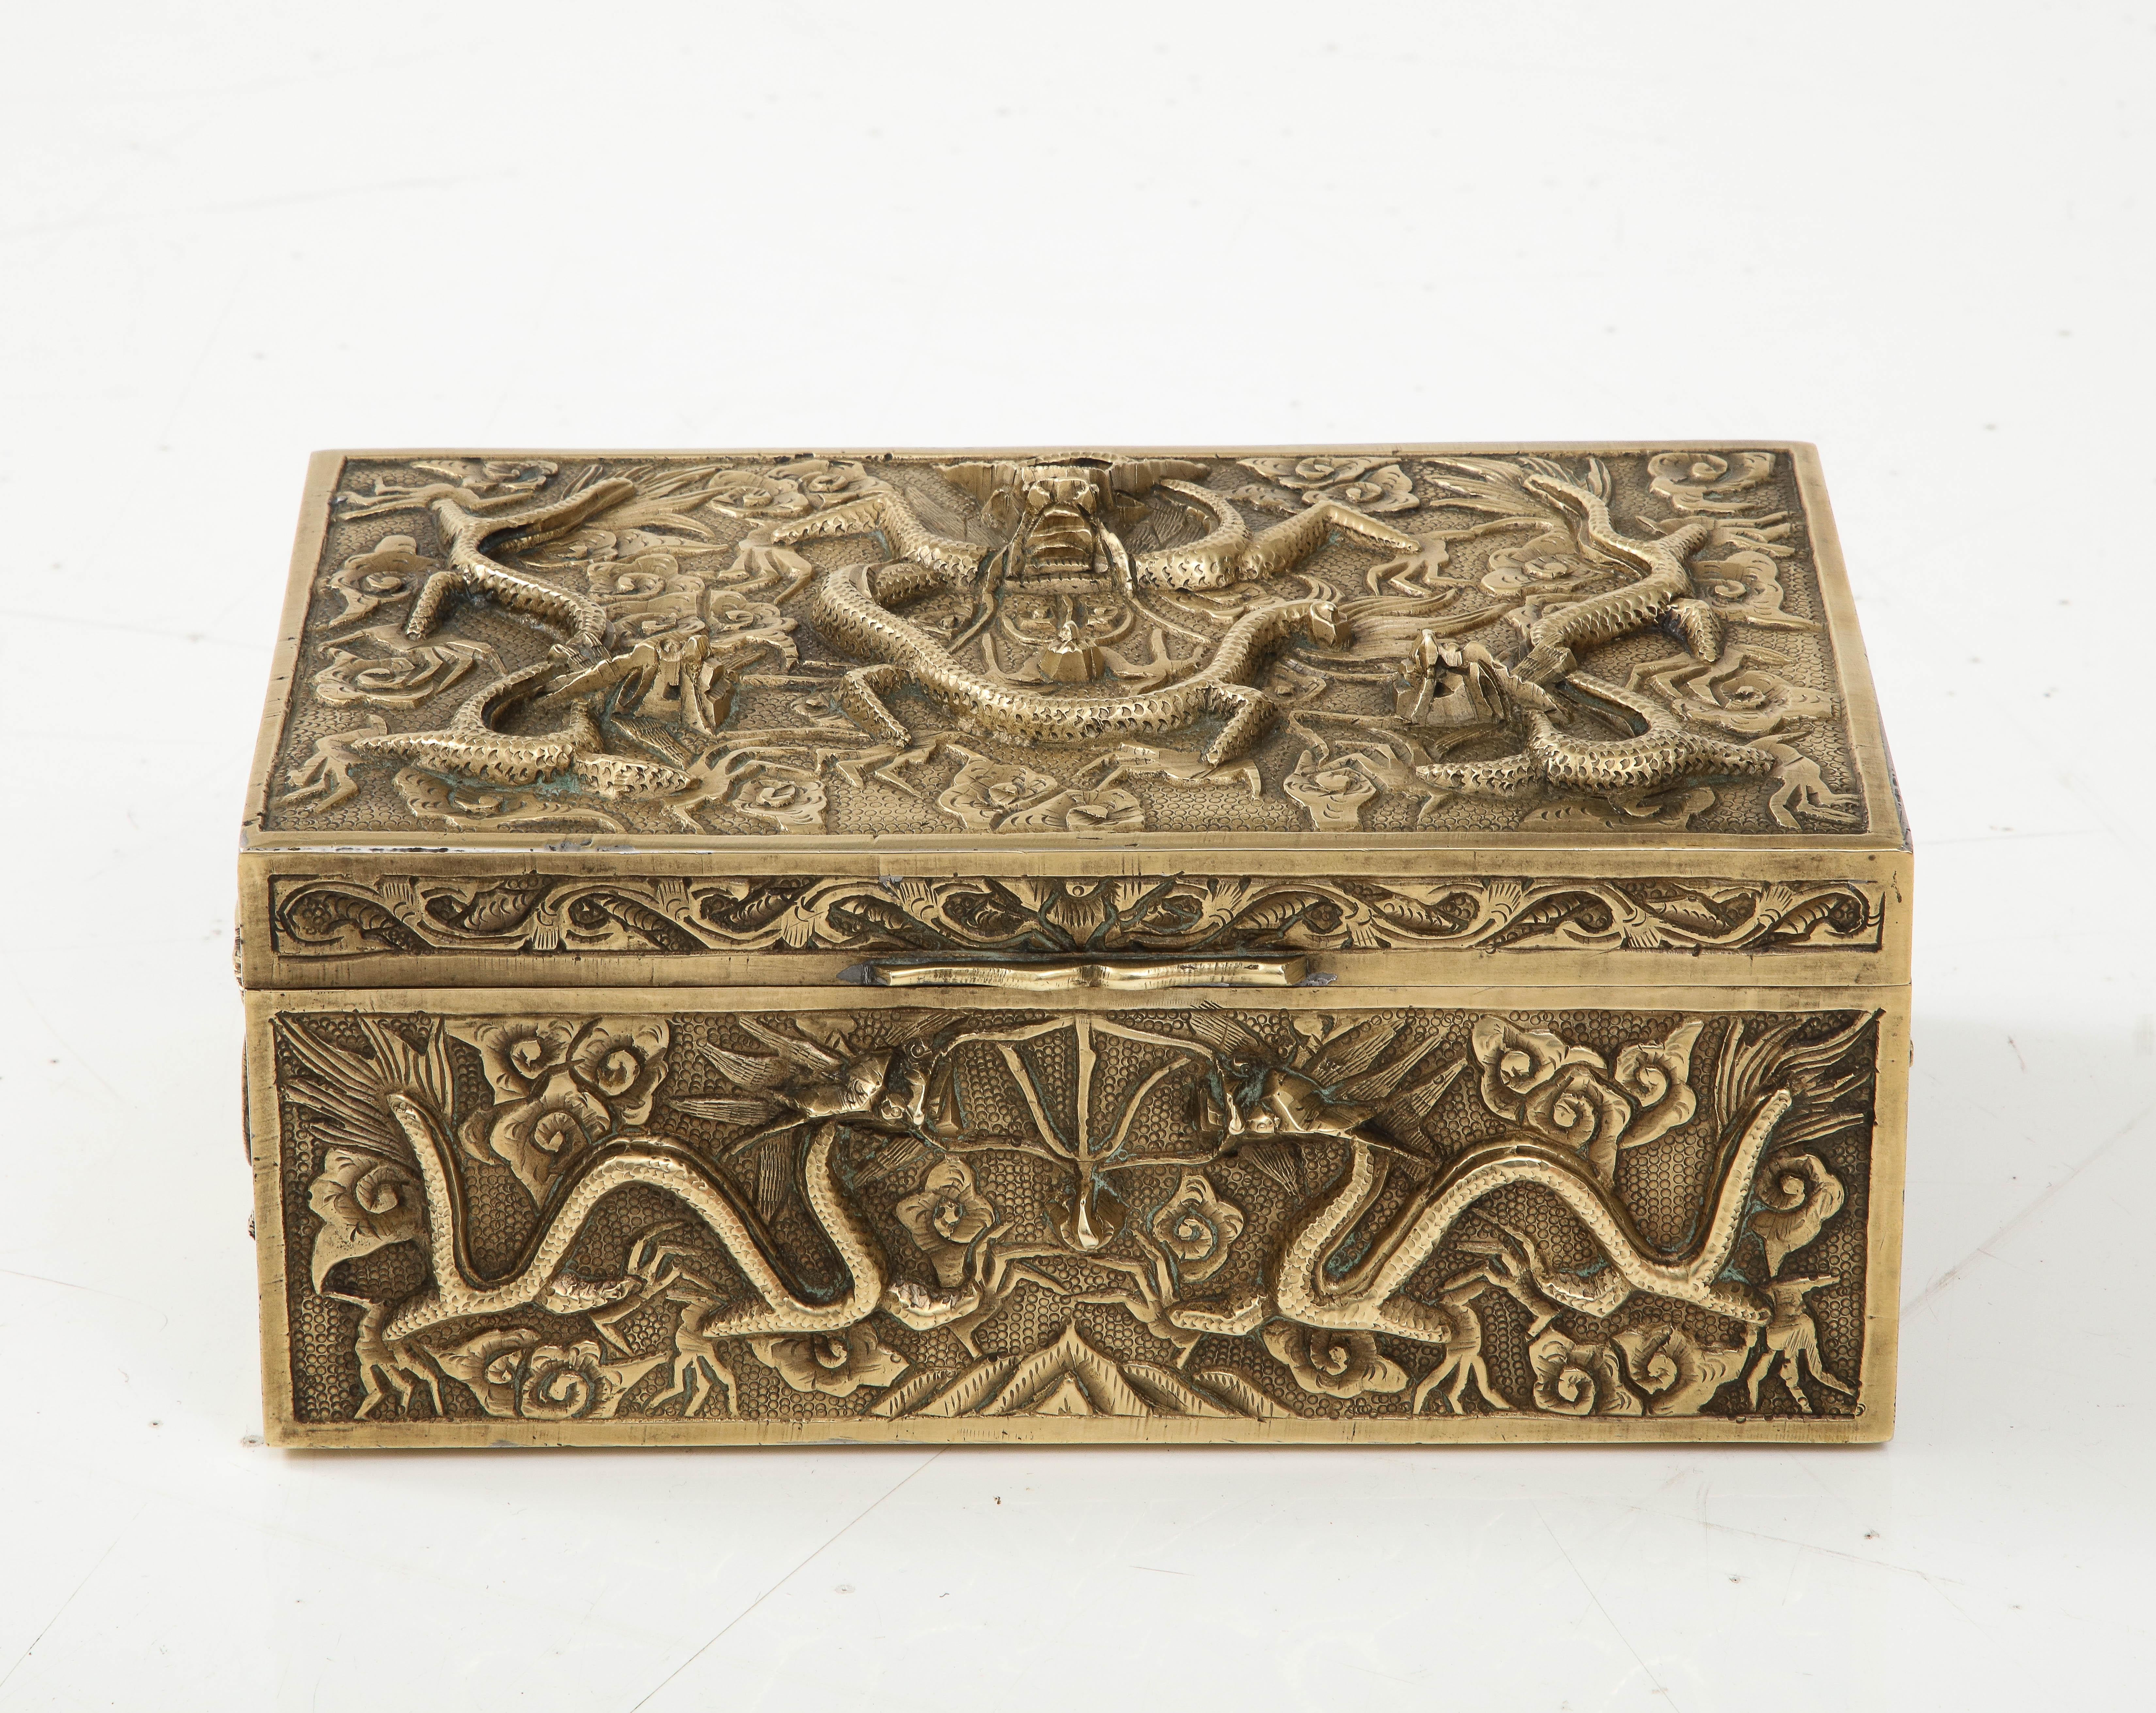 Beautiful 1930's solid brass Chinese jewelry box with dragon inlay motif and wood interior, in vintage condition with some wear to the good and patina to the brass, lightly hand polished.